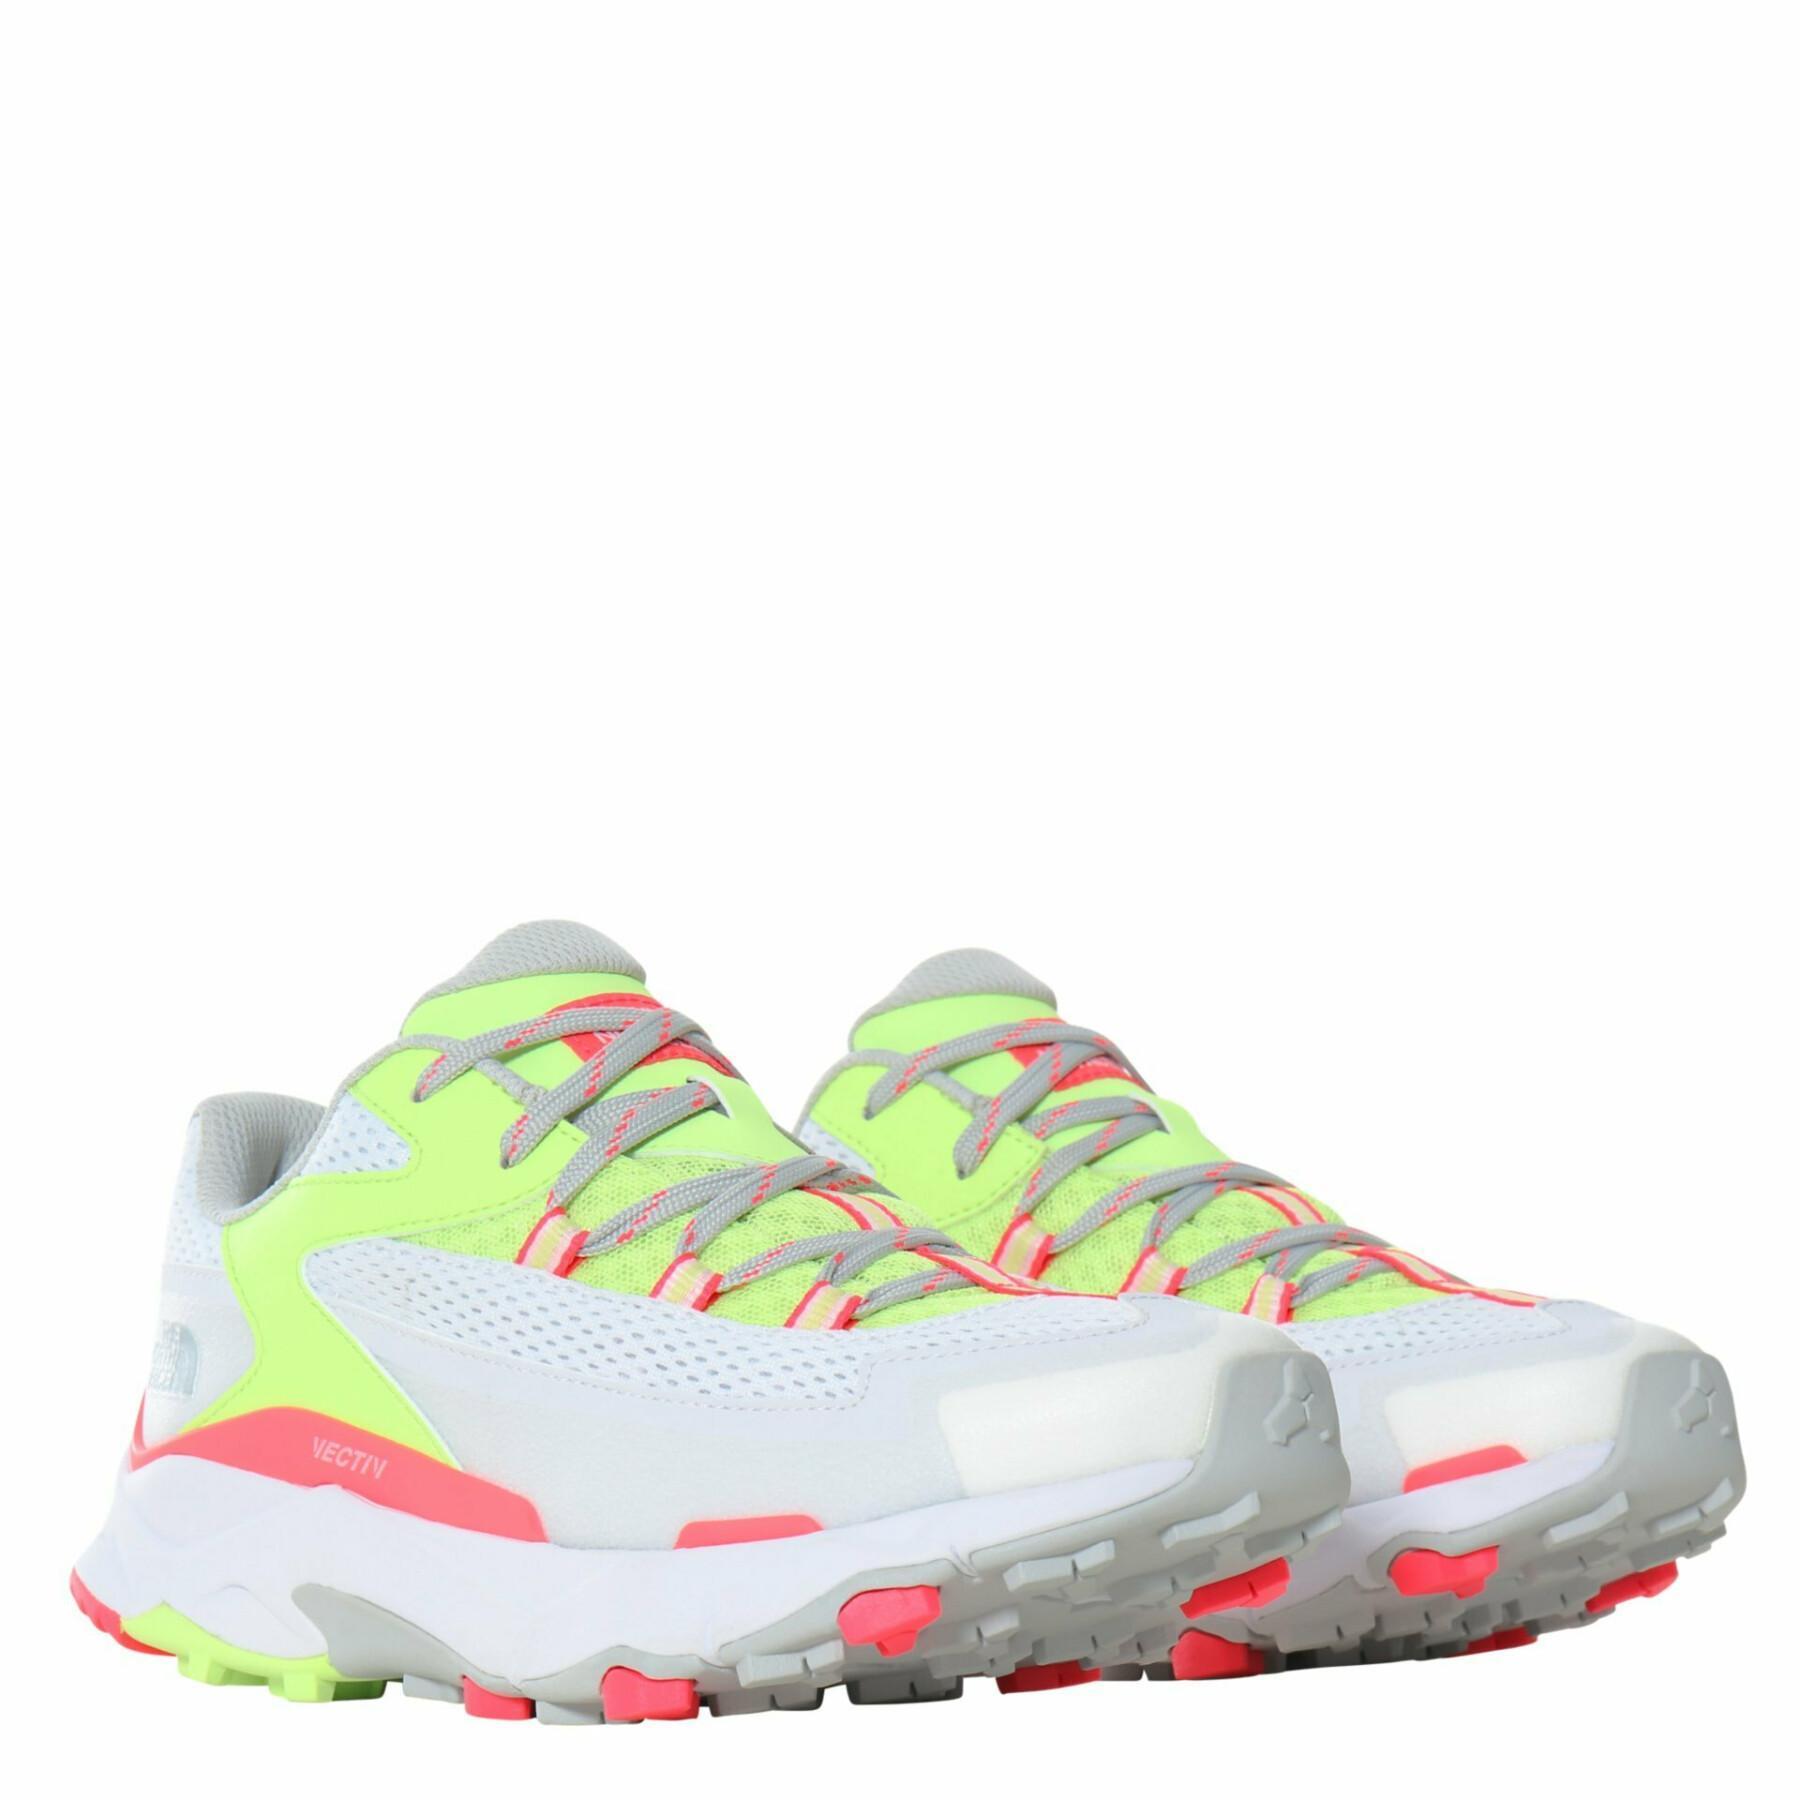 Chaussures femme The North Face Vectiv Taraval